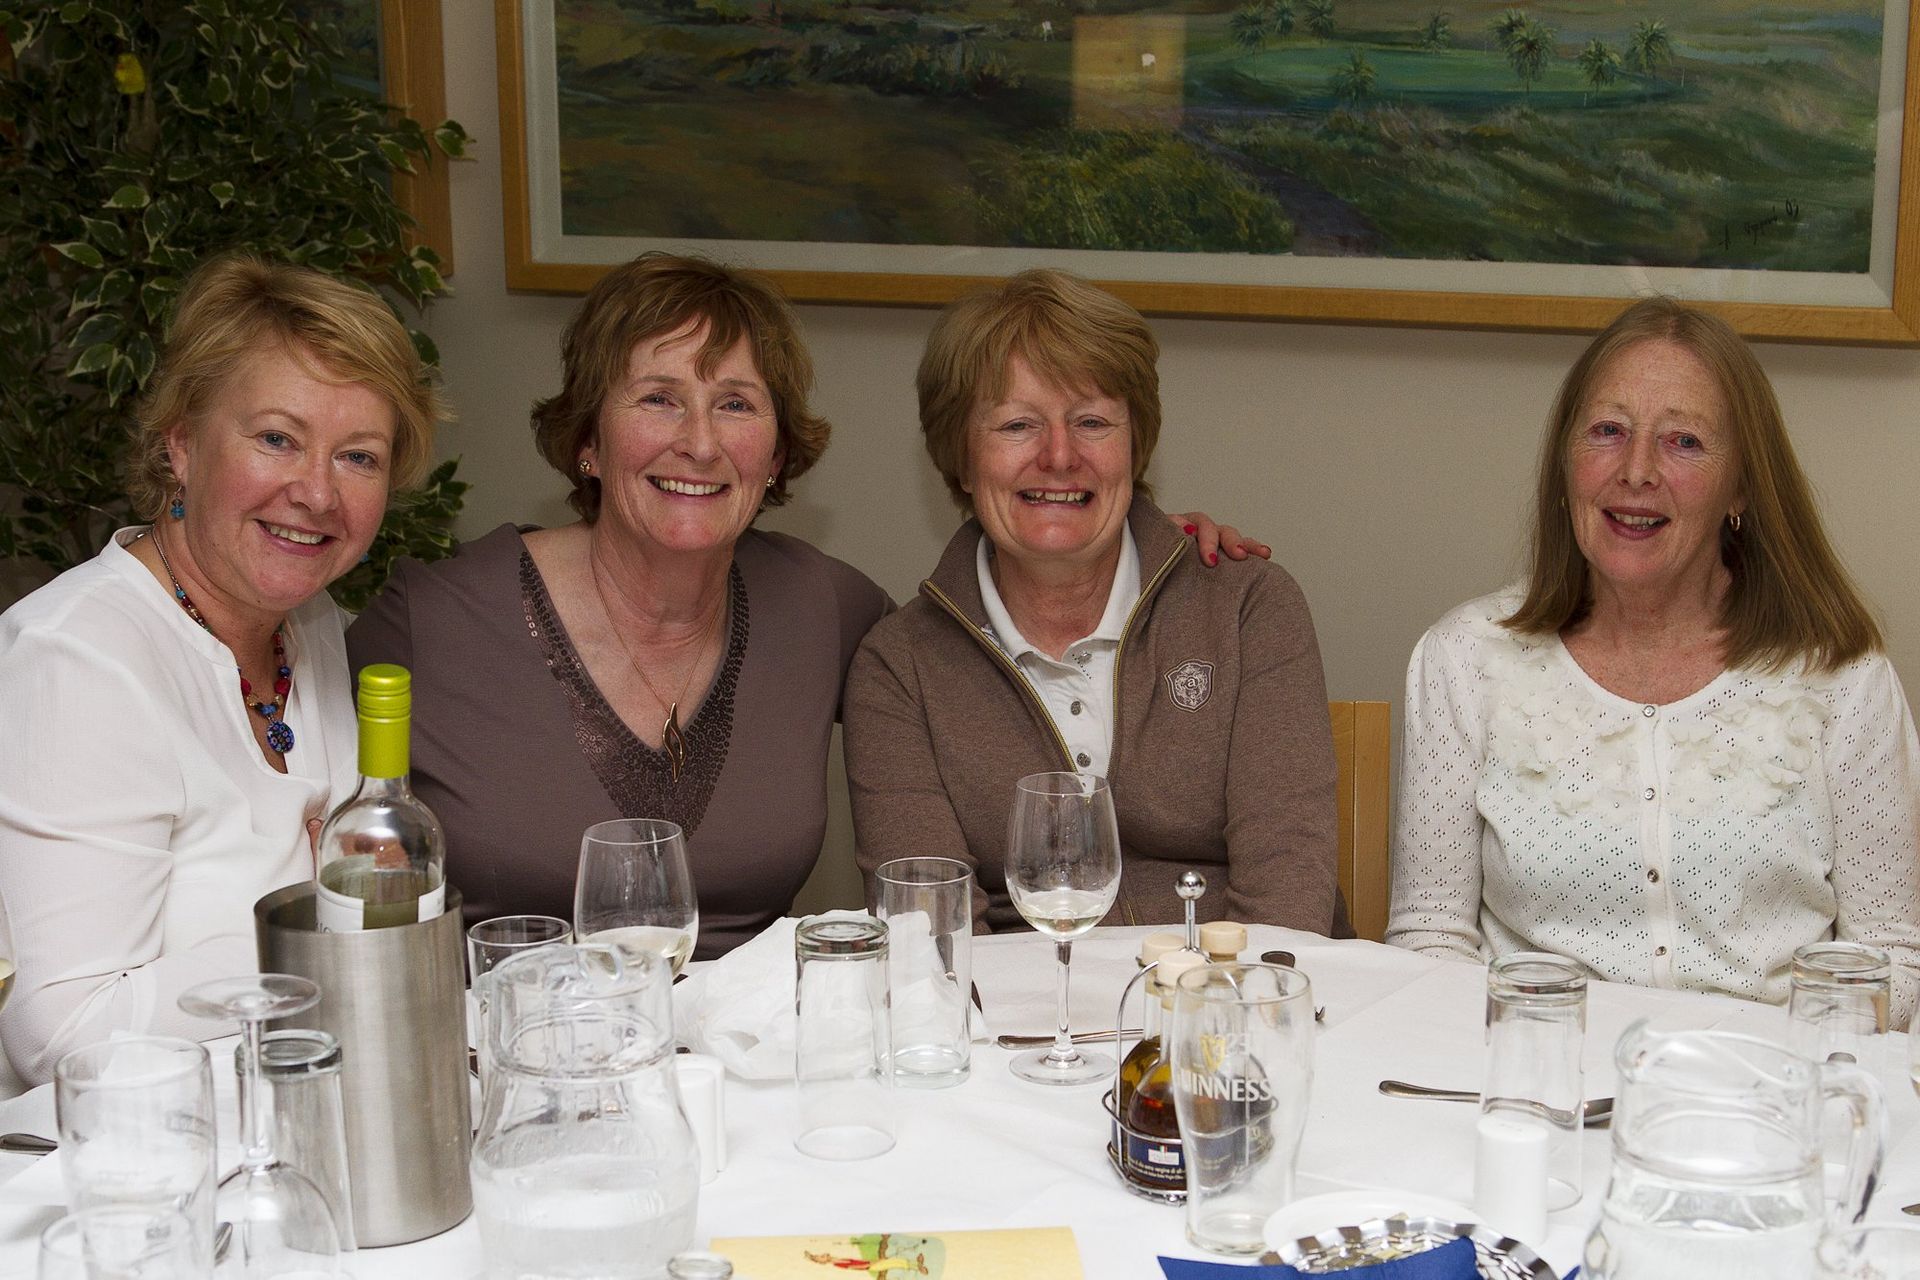 Four women are sitting at a table with wine glasses and smiling.